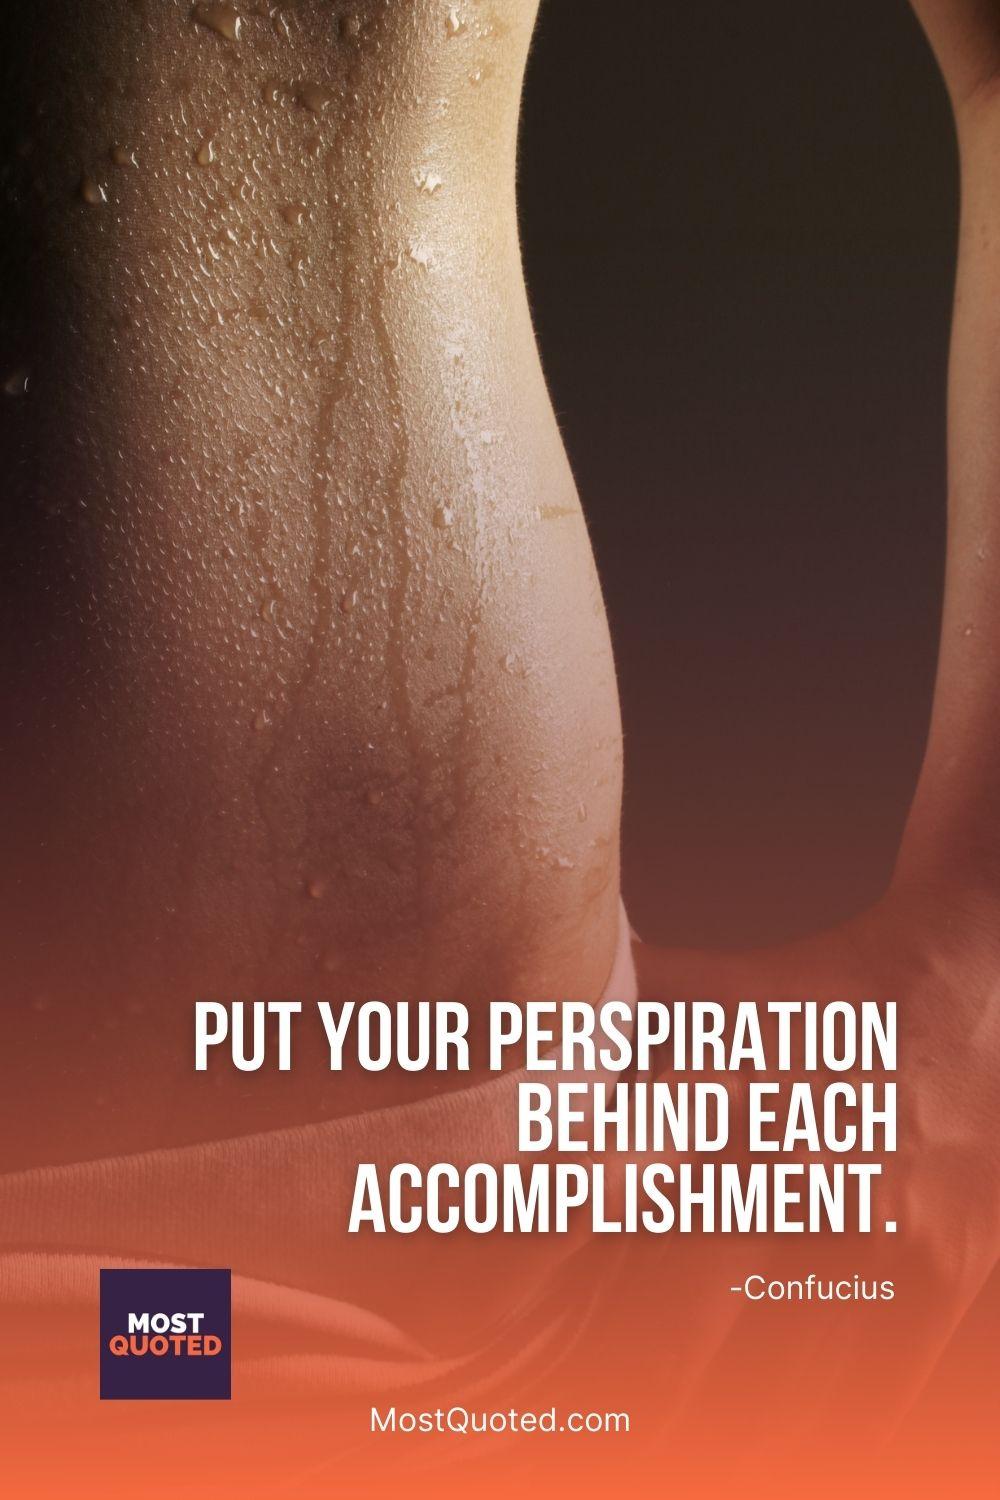 Put your perspiration behind each accomplishment. - Confucius